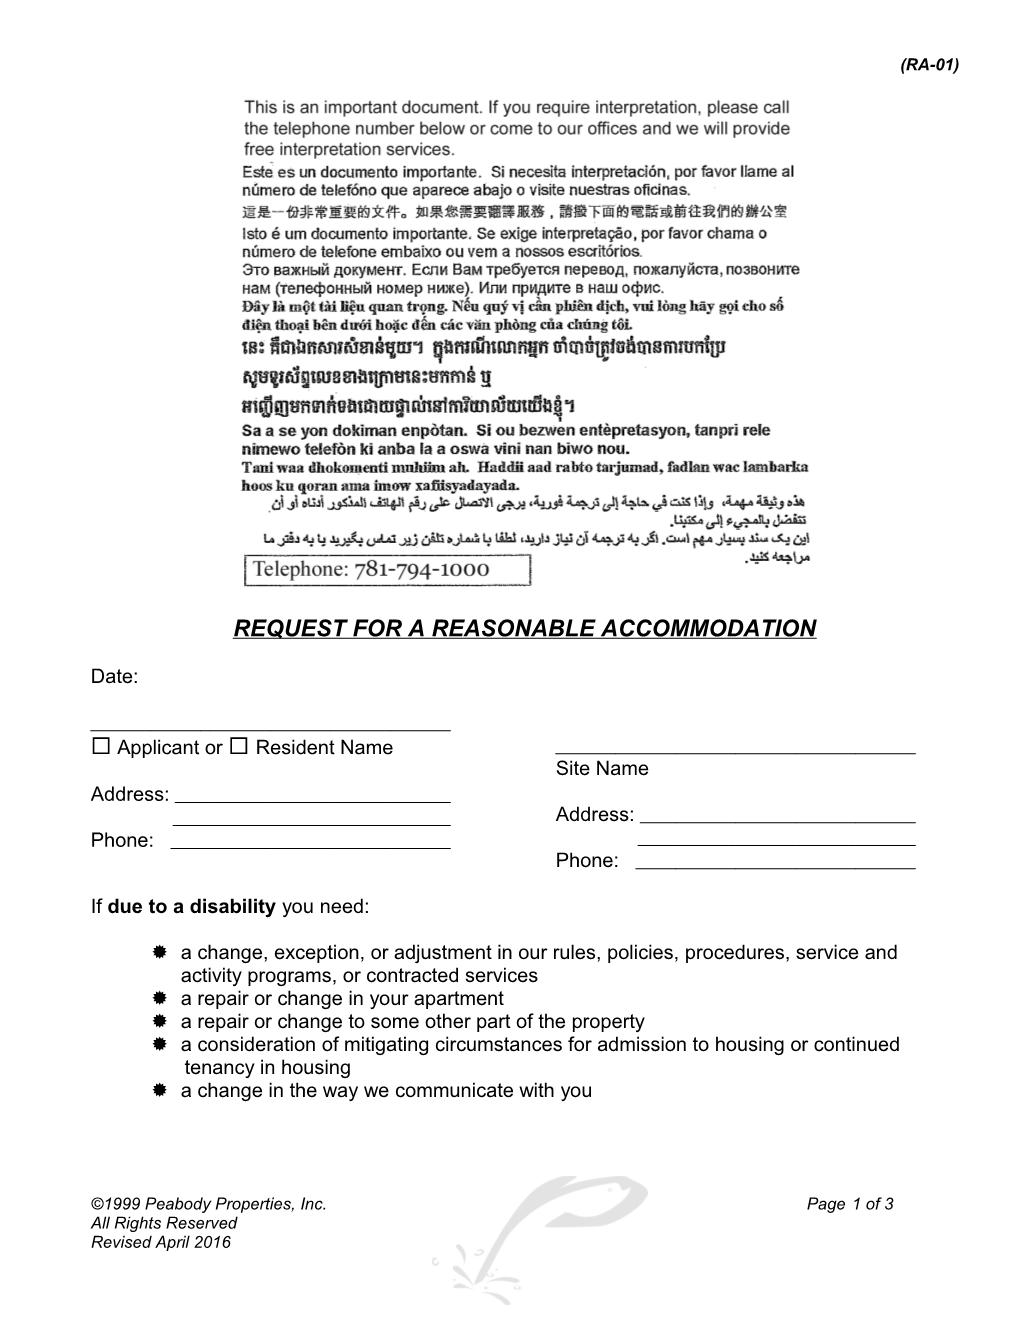 Request for a Reasonable Accommodation